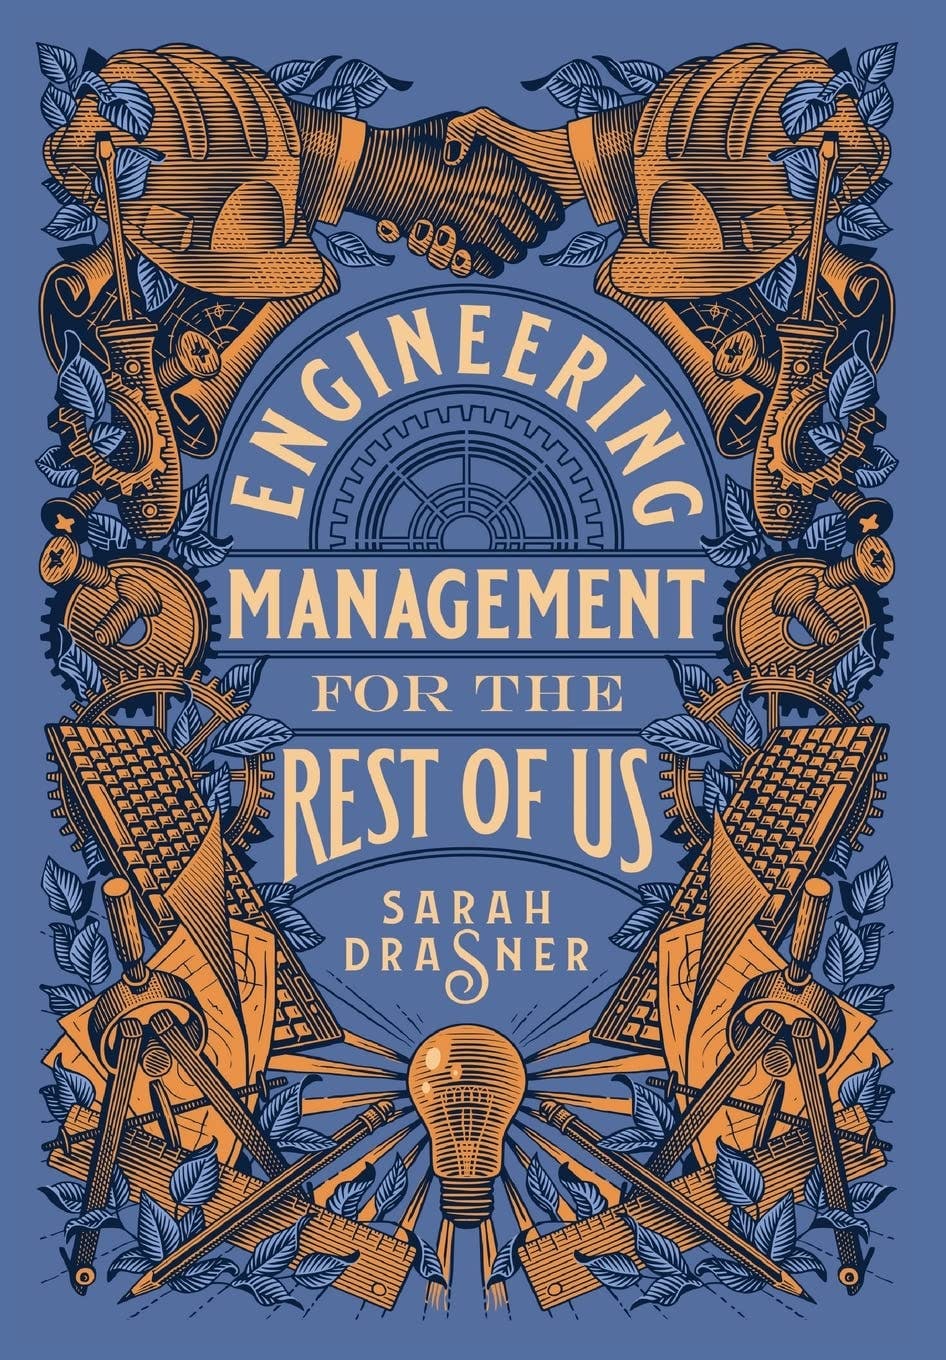 Engineering Management for the Rest of Us, by Sarah Drasner